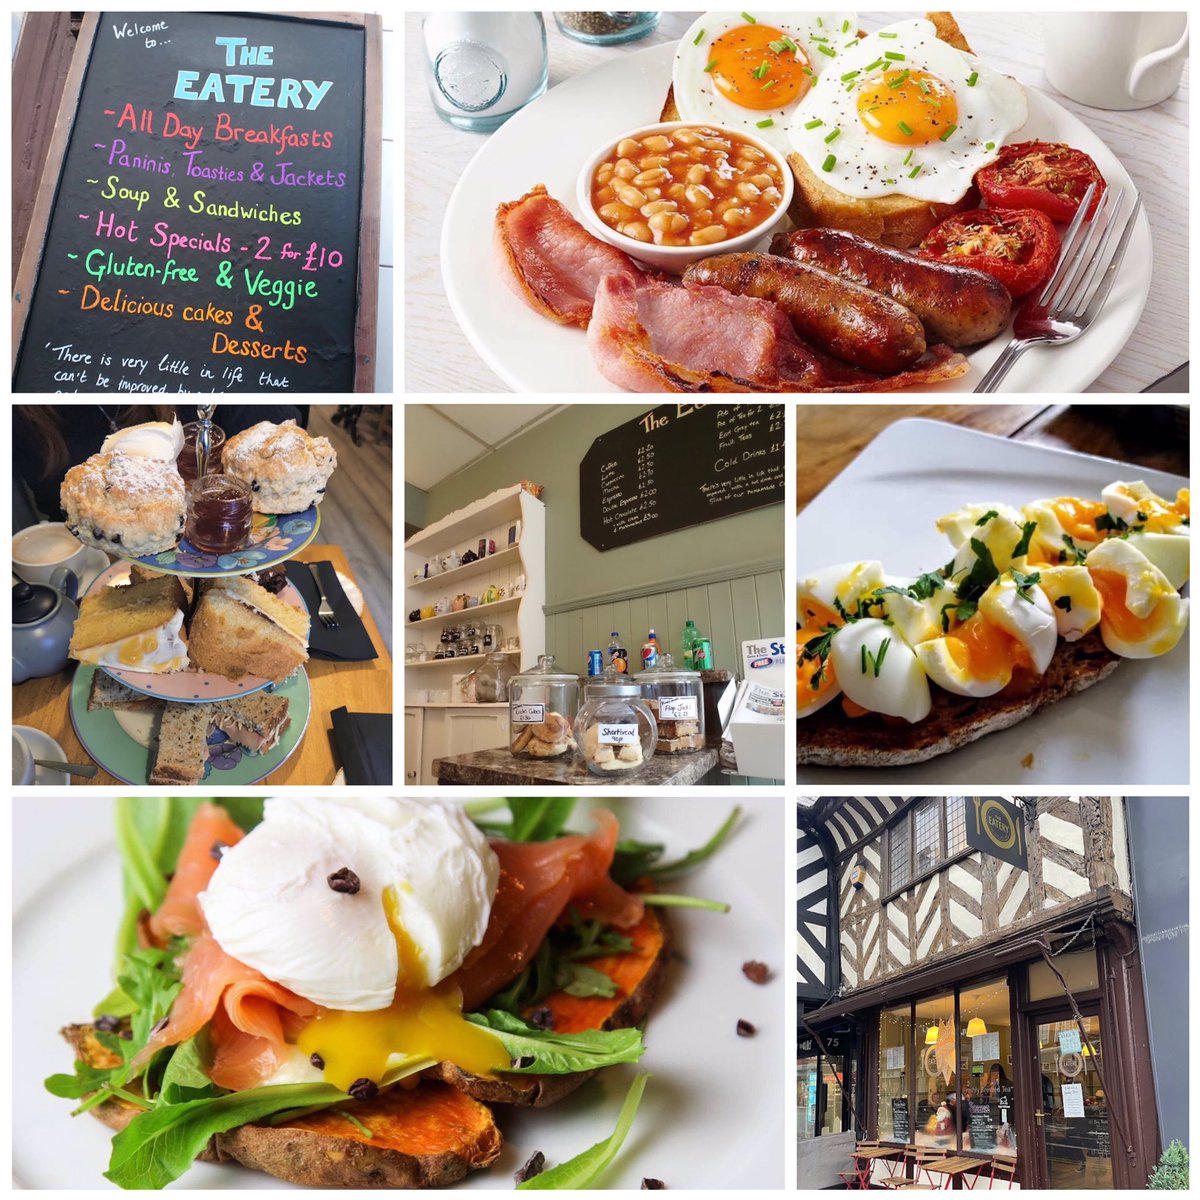 The Eatery: Having A Cooked Breakfast…
77 Foregate St, Chester, CH1 1HE…
#theeatery #chester #cookedbreakfast #food